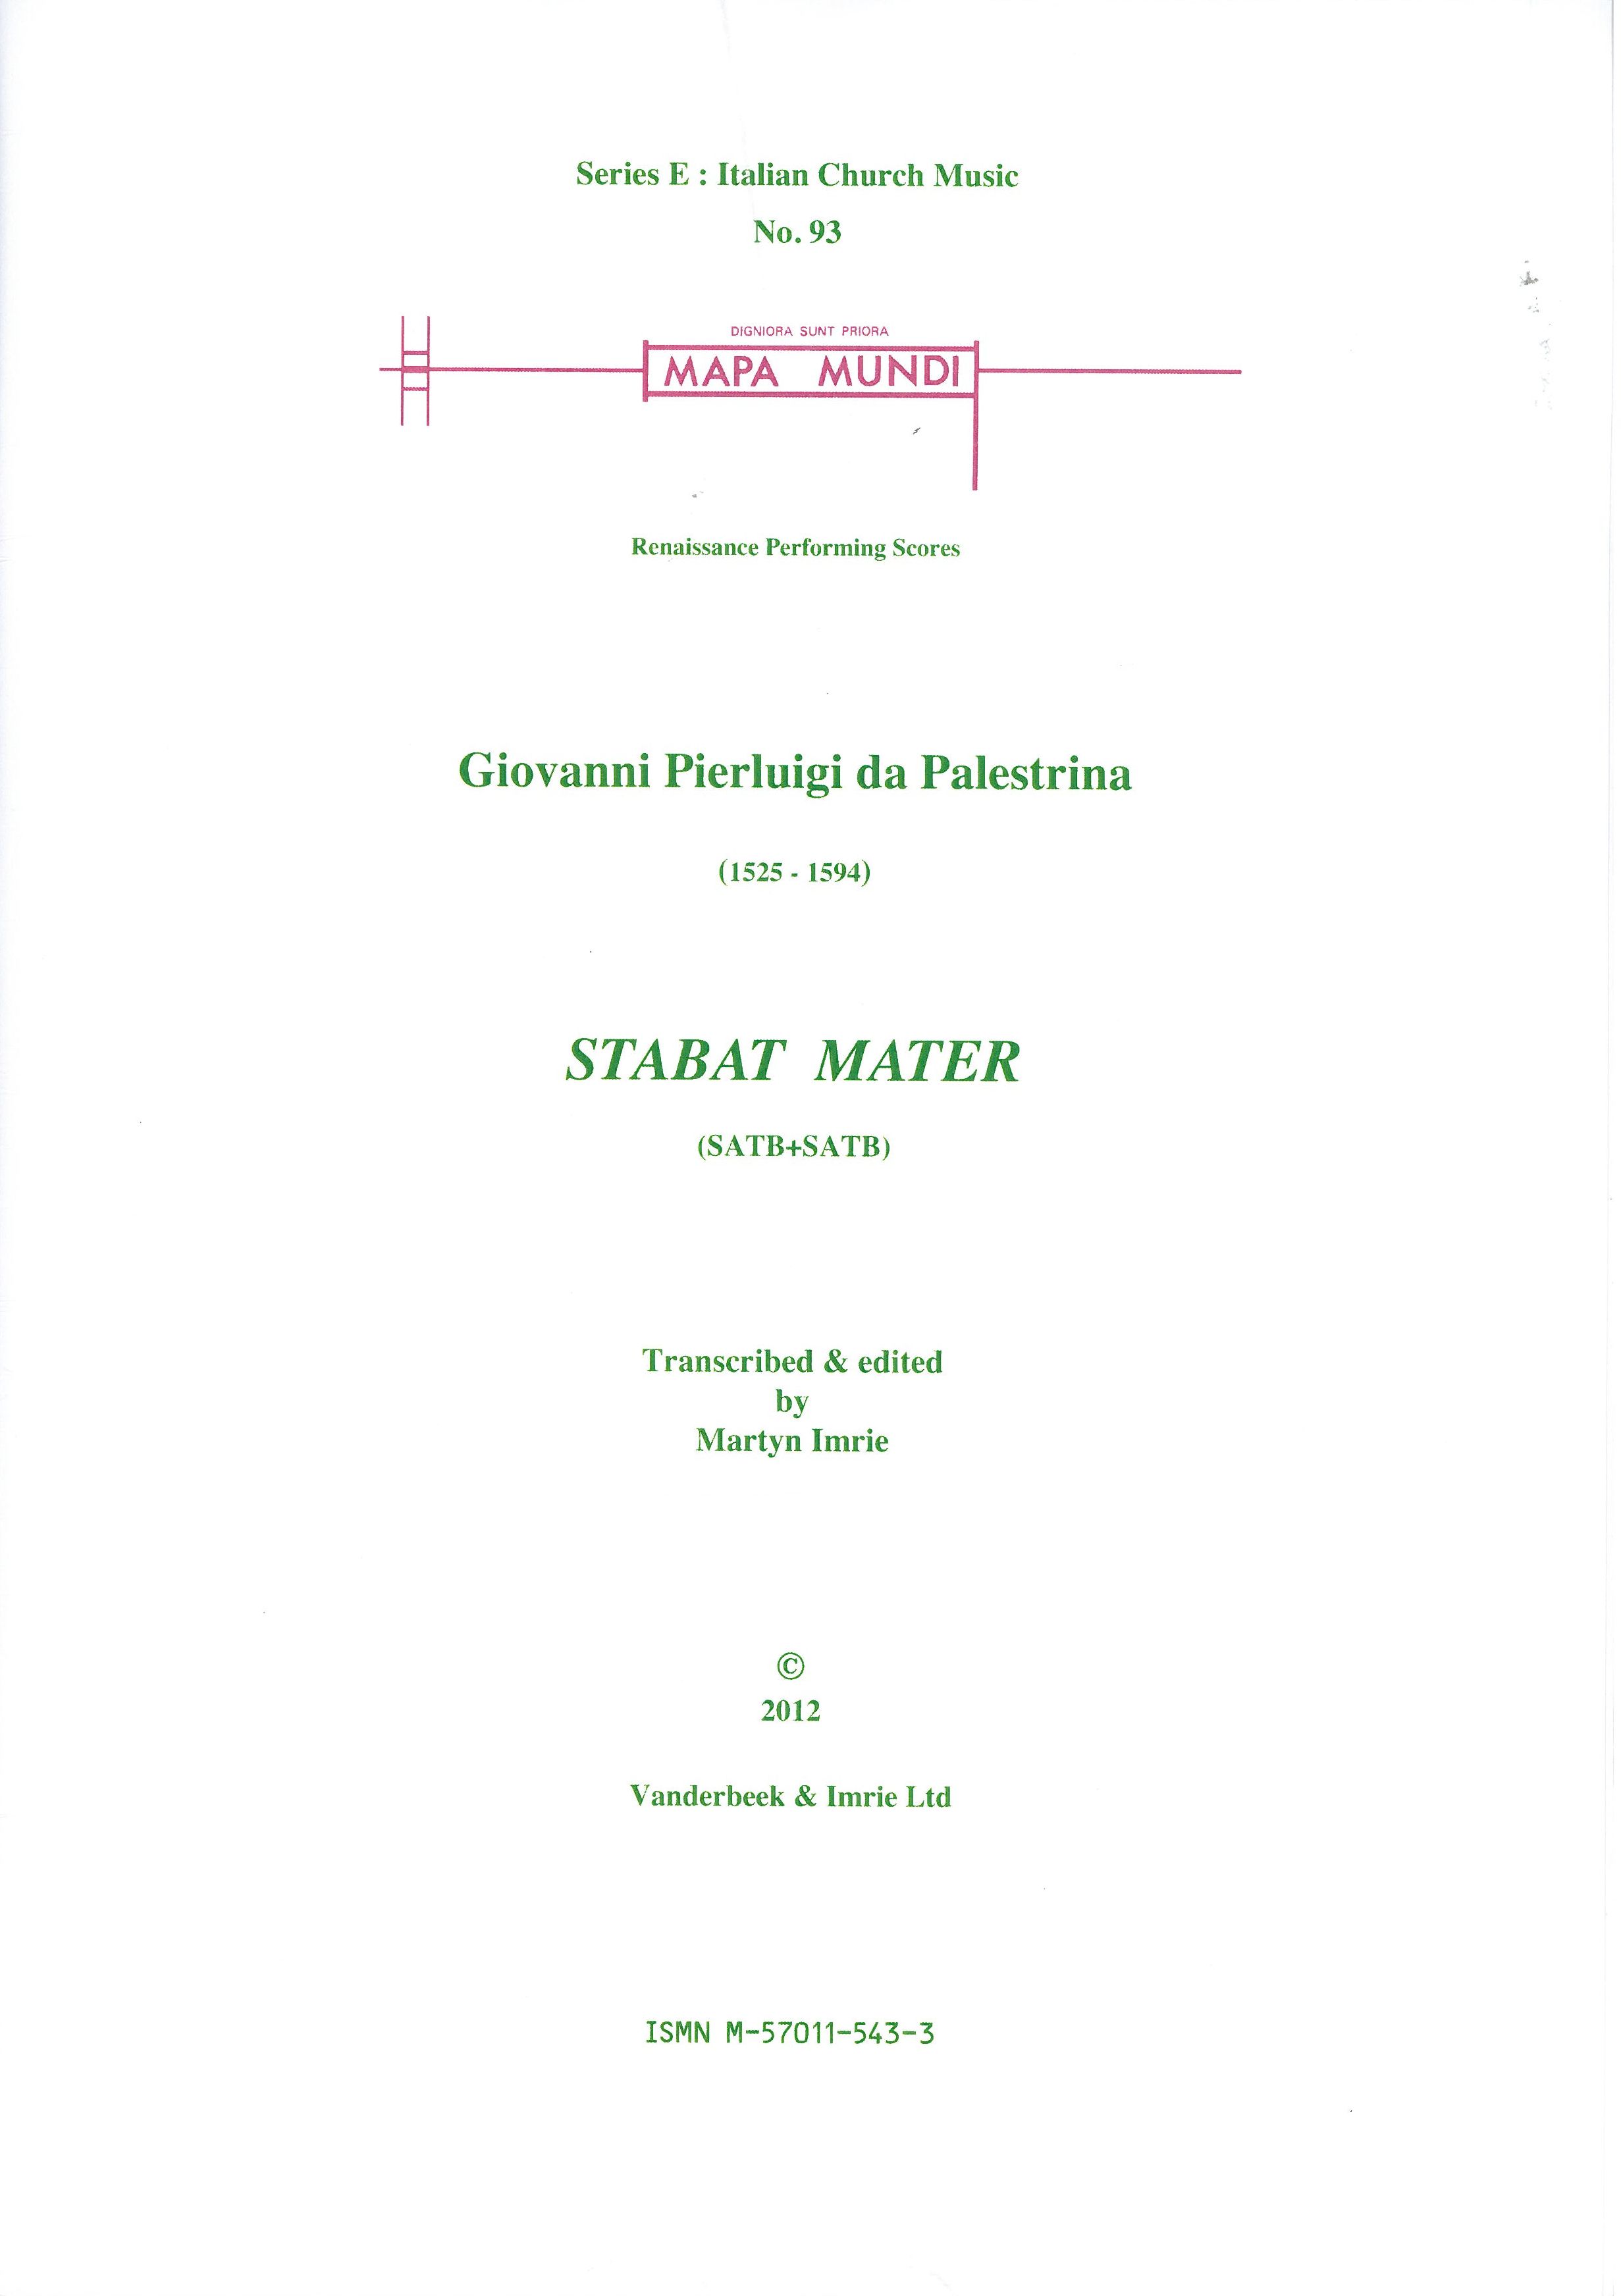 Stabat Mater (SATB+SATB) / edited by Martyn Imrie.